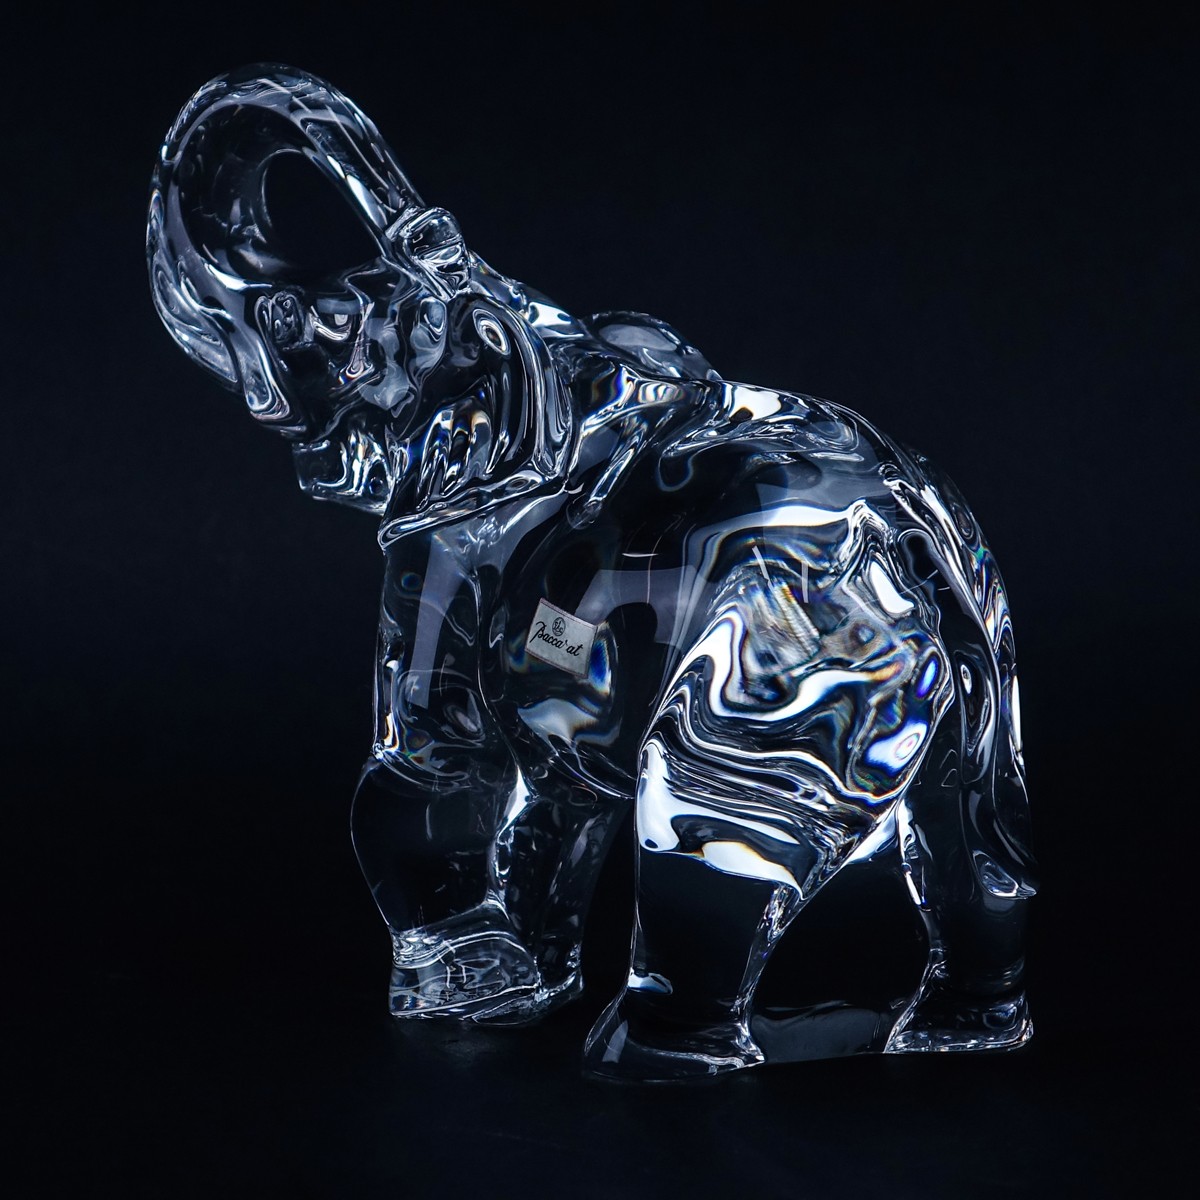 Baccarat Crystal Elephant Figure. Signed. Good condition. Measures 6-1/2" H. (estimate $100-$200) S